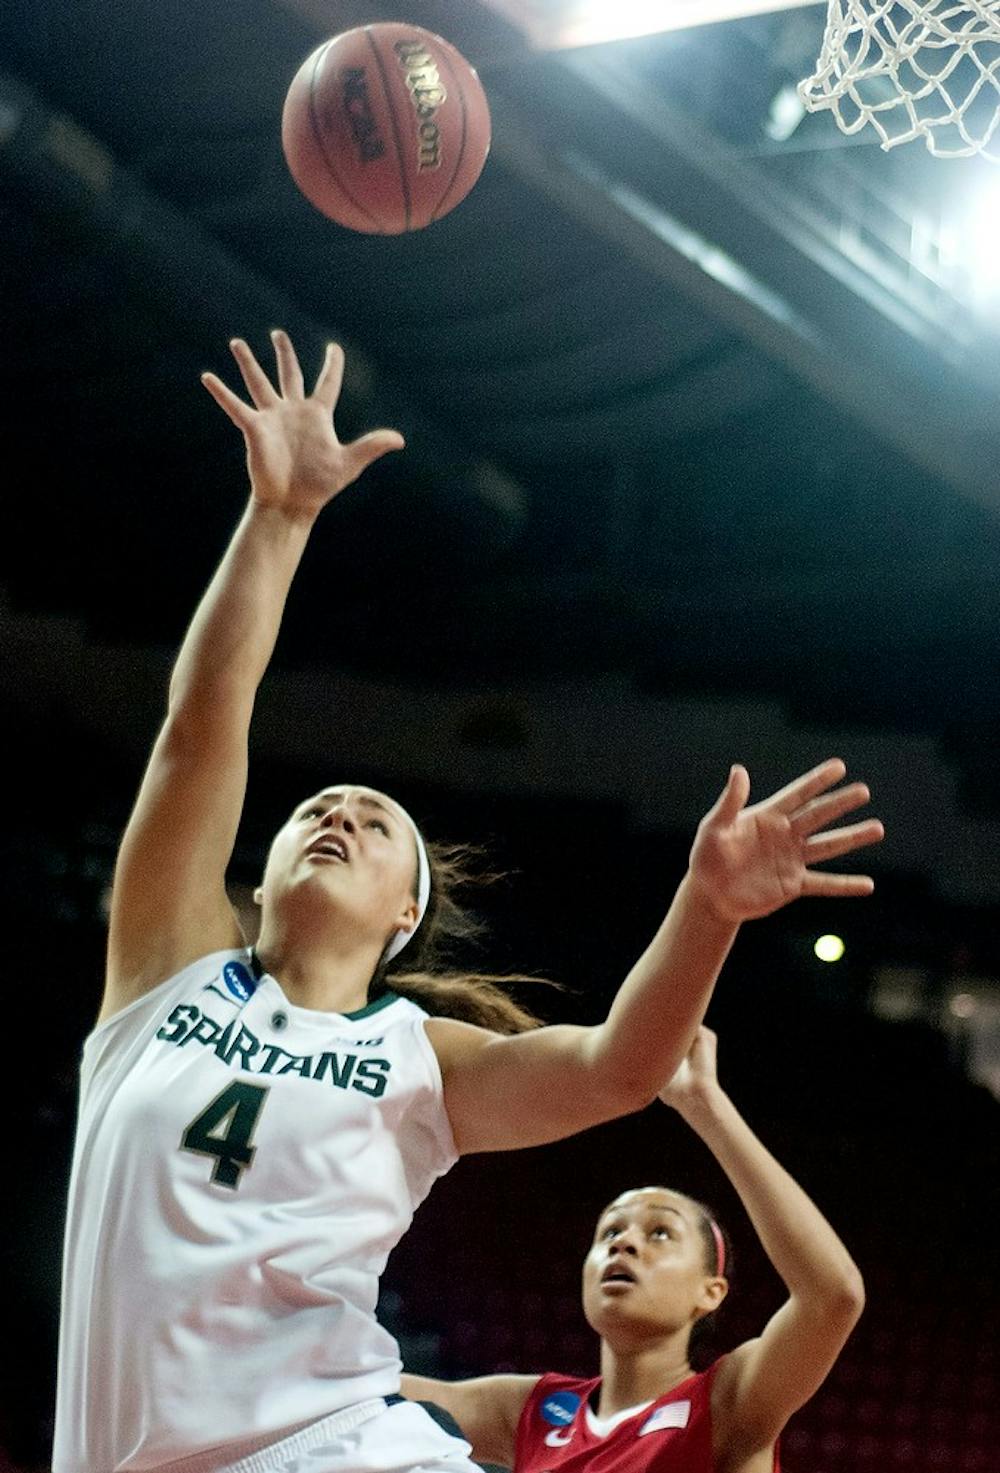 	<p>Sophomore center Jasmine Hines shoots during the first round of the <span class="caps">NCAA</span> Tournament on Saturday, March 23, 2013, against Marist at Comcast center in College Park, Maryland. The Spartans defeated the Red Foxes, 55-47. Julia Nagy/The State News</p>